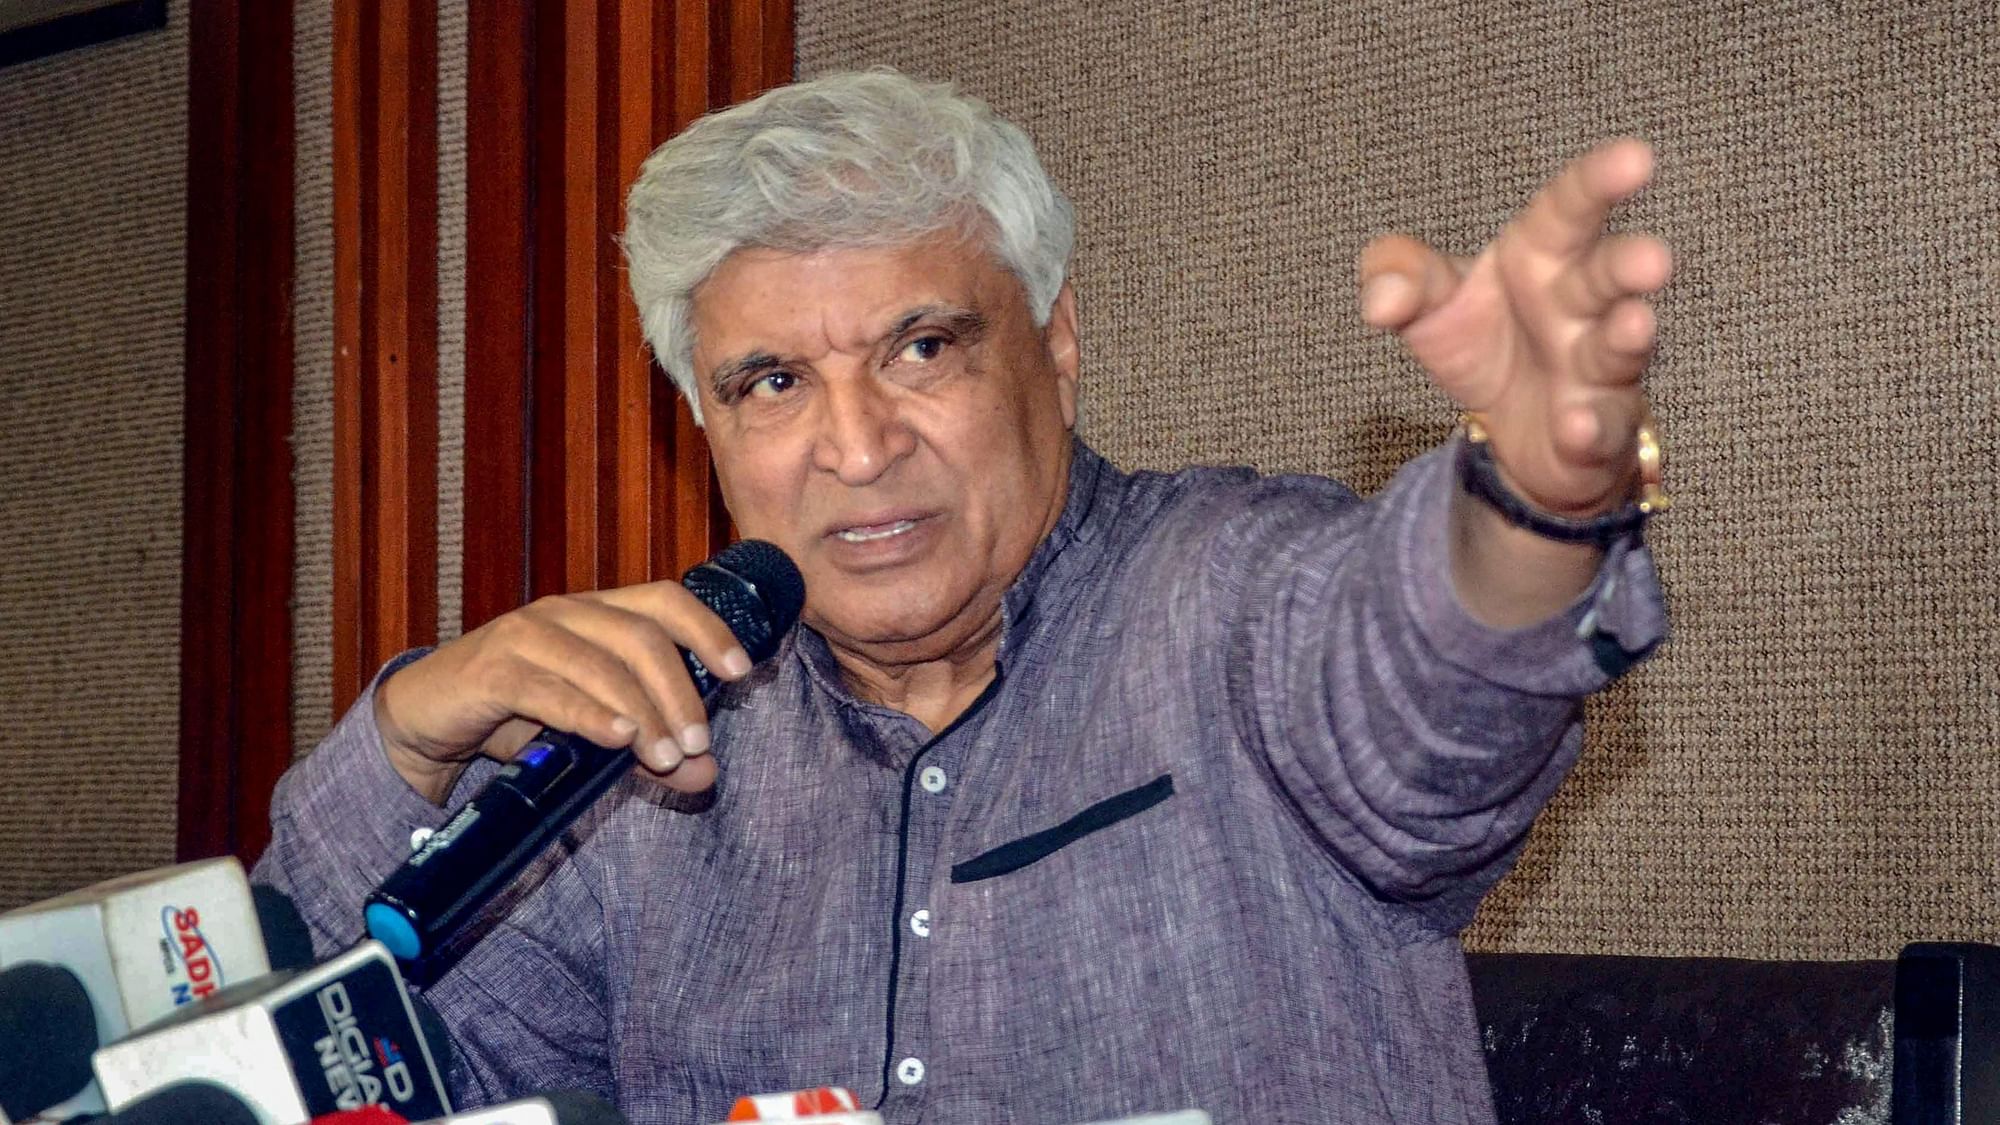 Javed Akhtar tweeted, noting how television channels were more concerned about Karan Johar's house party of last year instead of talking about the controversial farm Bills passed recently by Parliament.